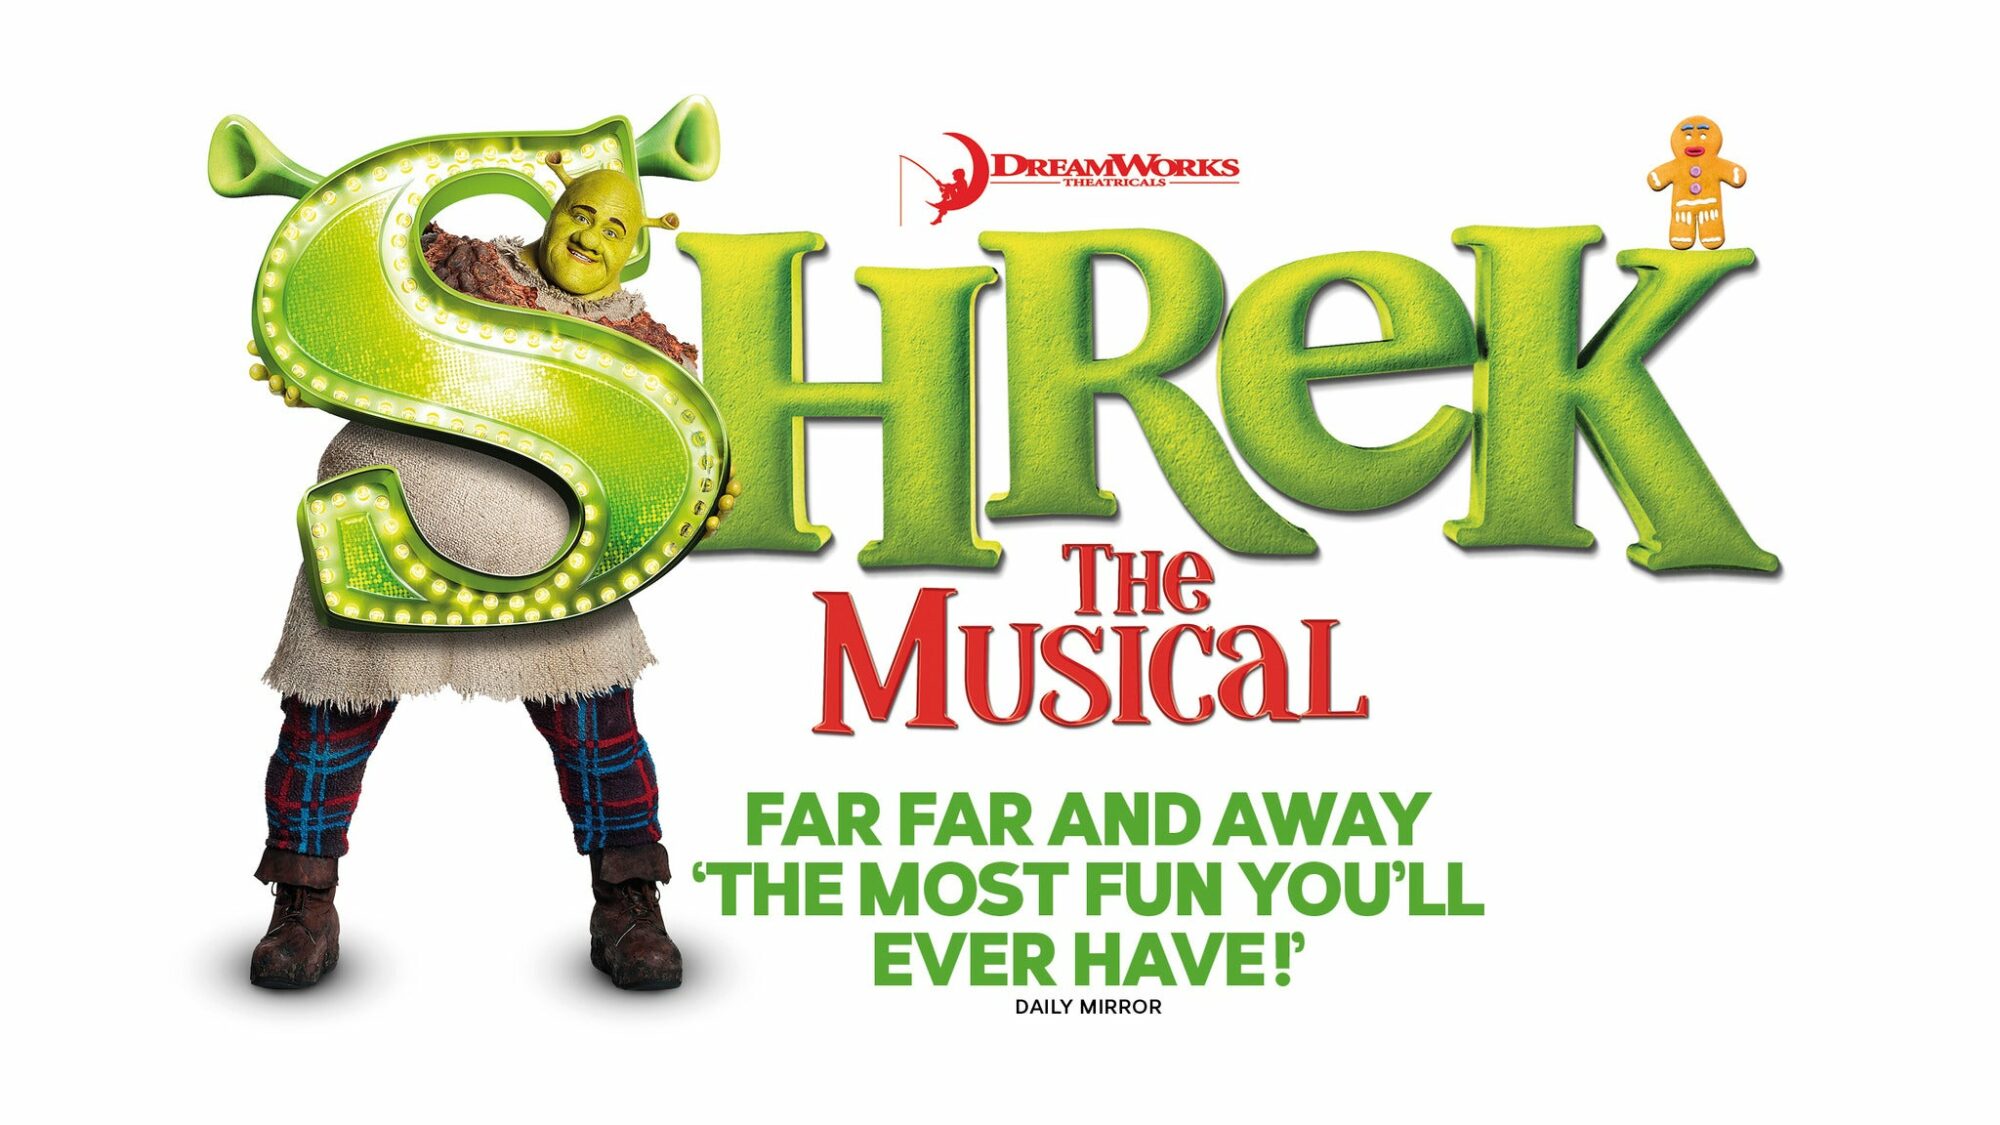 Image name Shrek The Musical JR at Whitby Pavilion Theatre Whitby the 1 image from the post Shrek: The Musical JR at Whitby Pavilion Theatre, Whitby in Yorkshire.com.